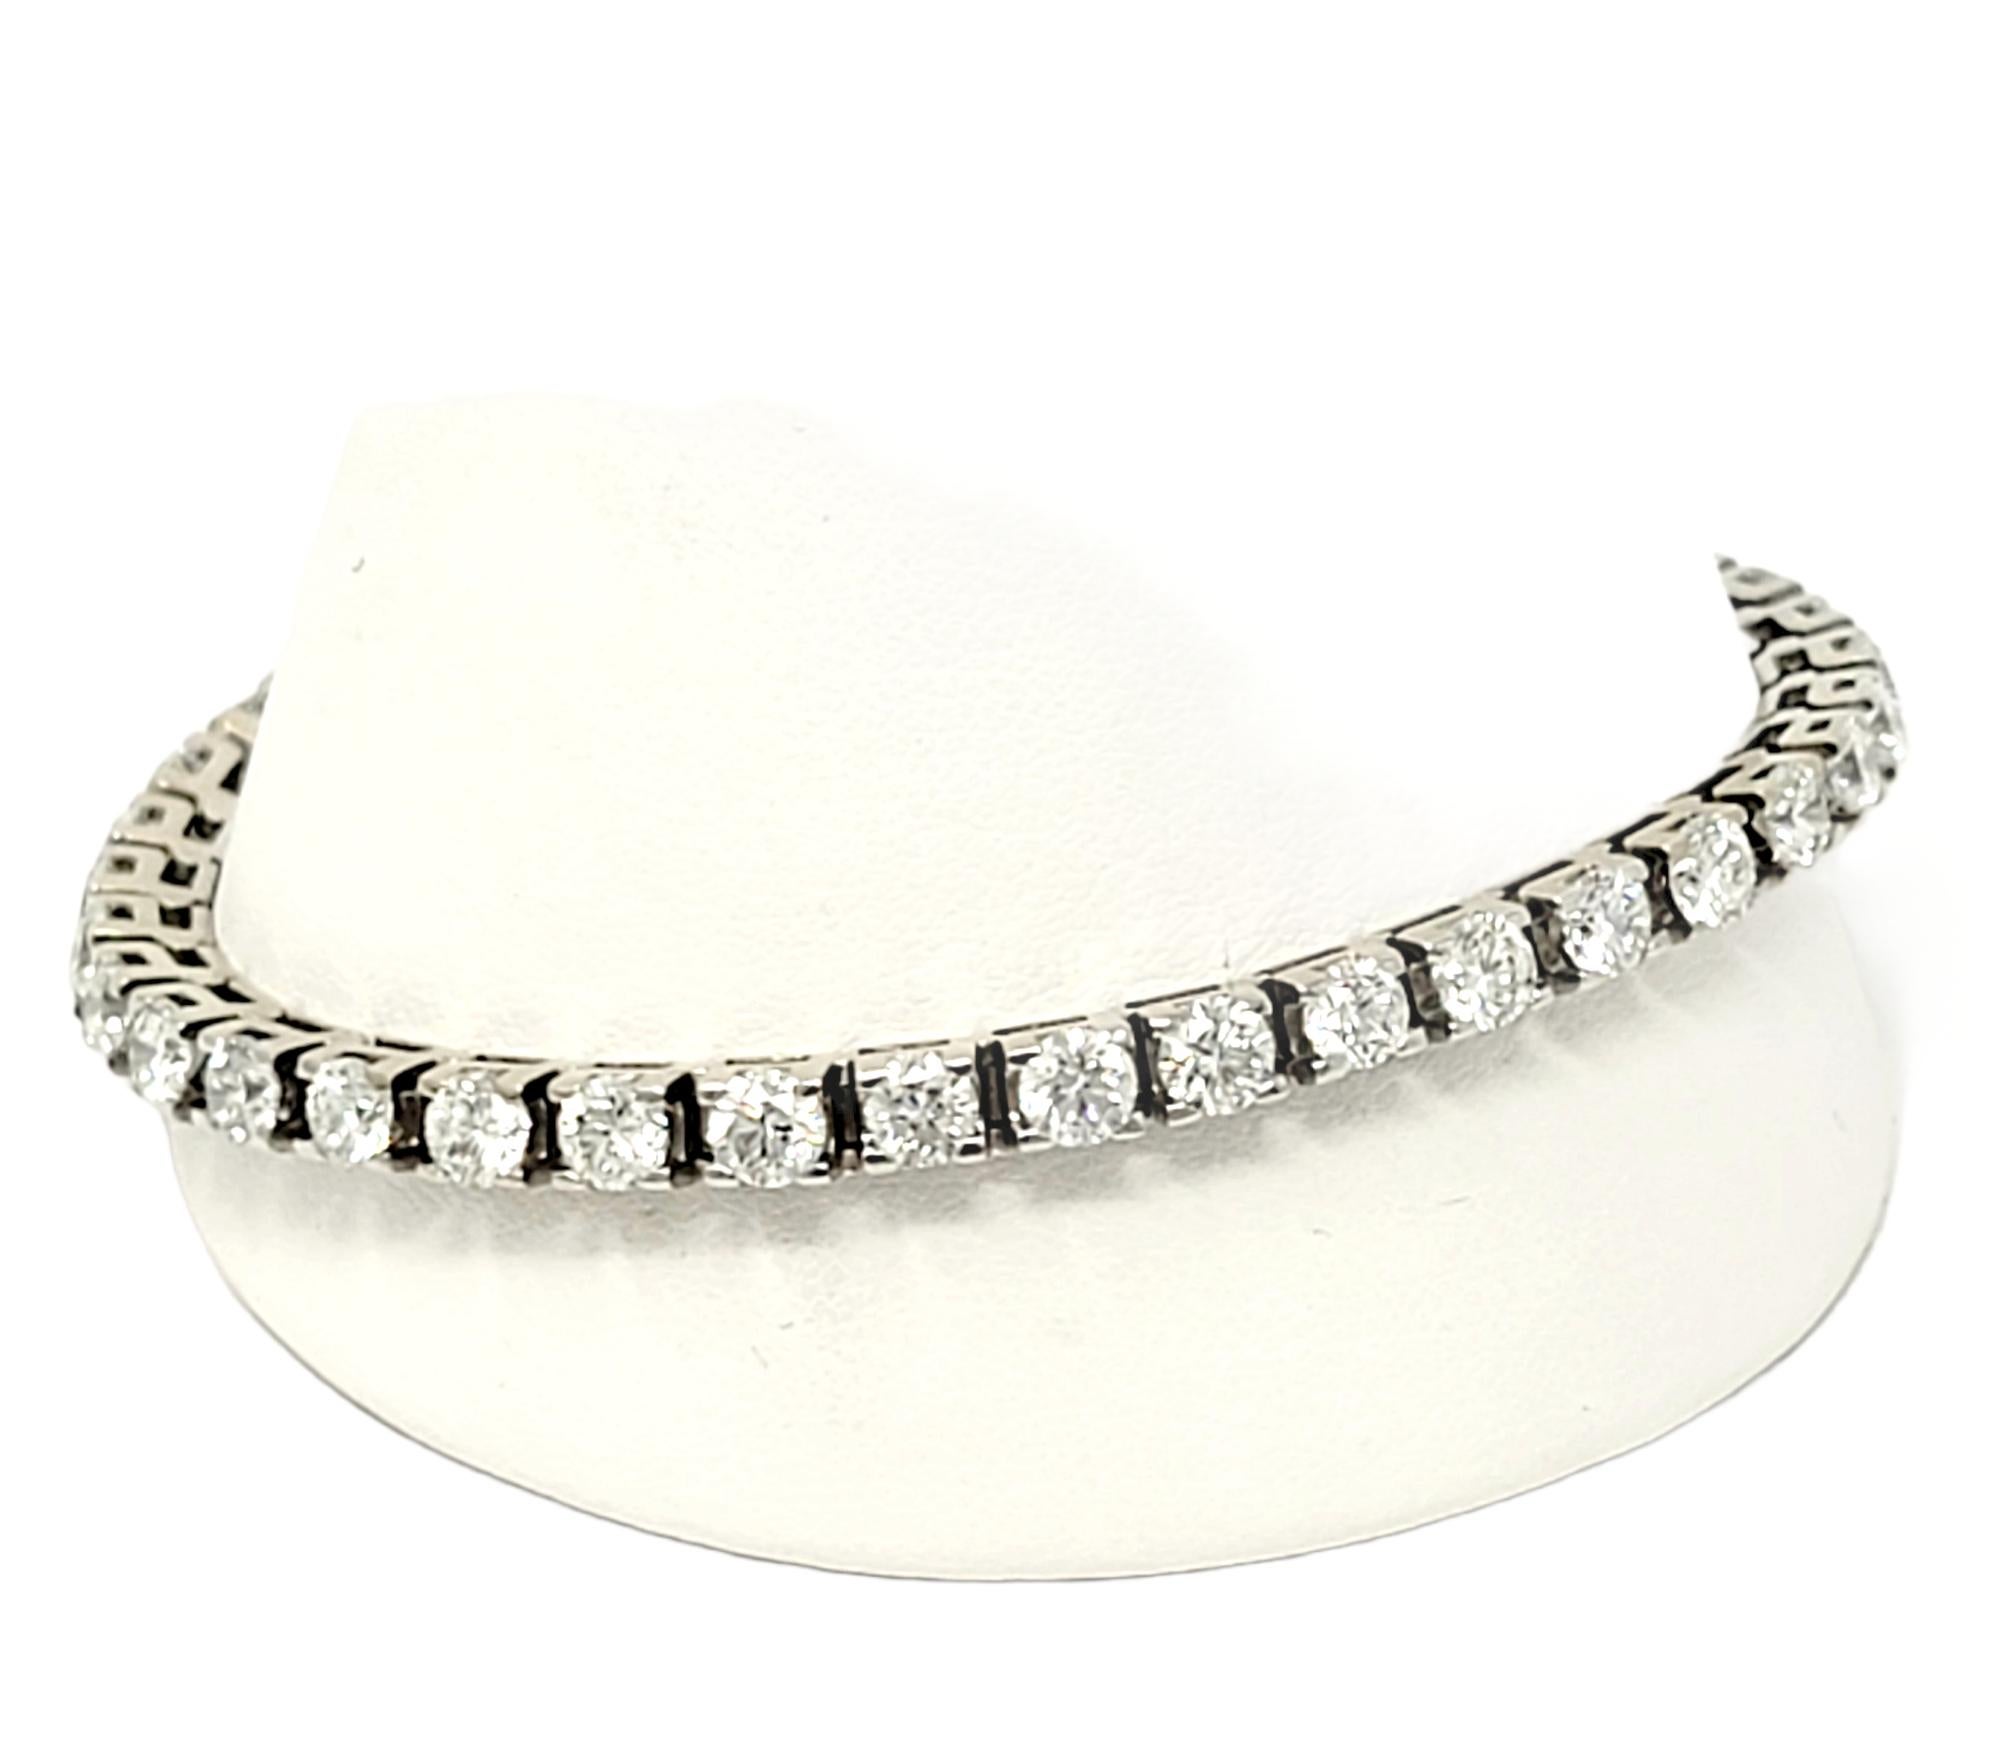 Absolutely stunning diamond tennis bracelet that will stand the test of time. The elegant white gold setting paired with the timeless round diamonds makes this piece a true classic that will never go out of style.   
This gorgeous bracelet features